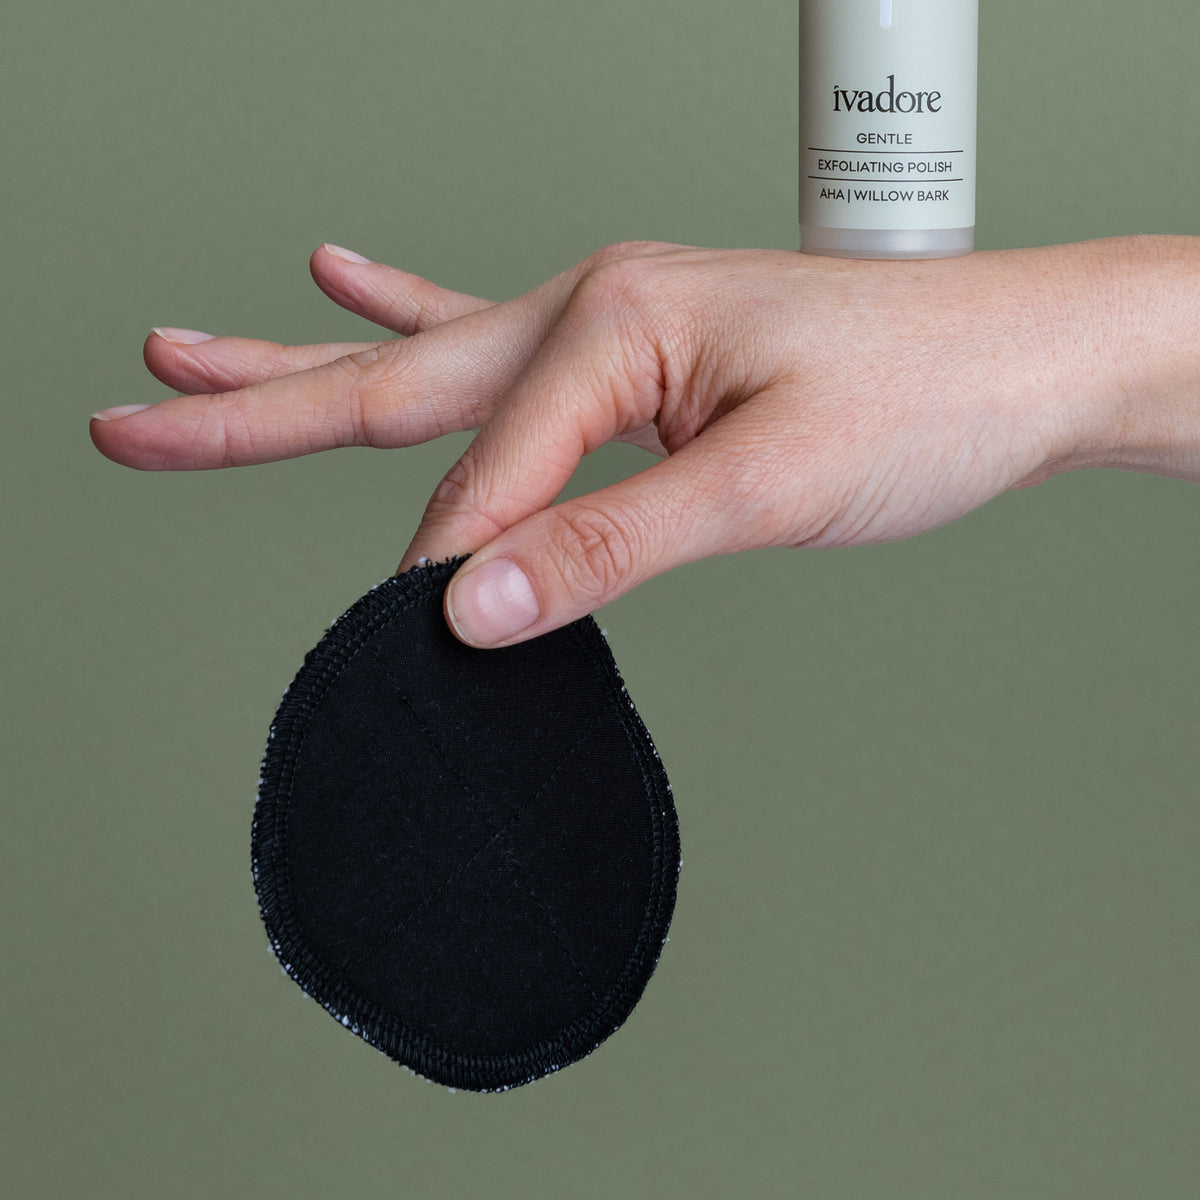 Female hand holding black washable facey wipe balancing a gentle exfoliating polish on top of hand